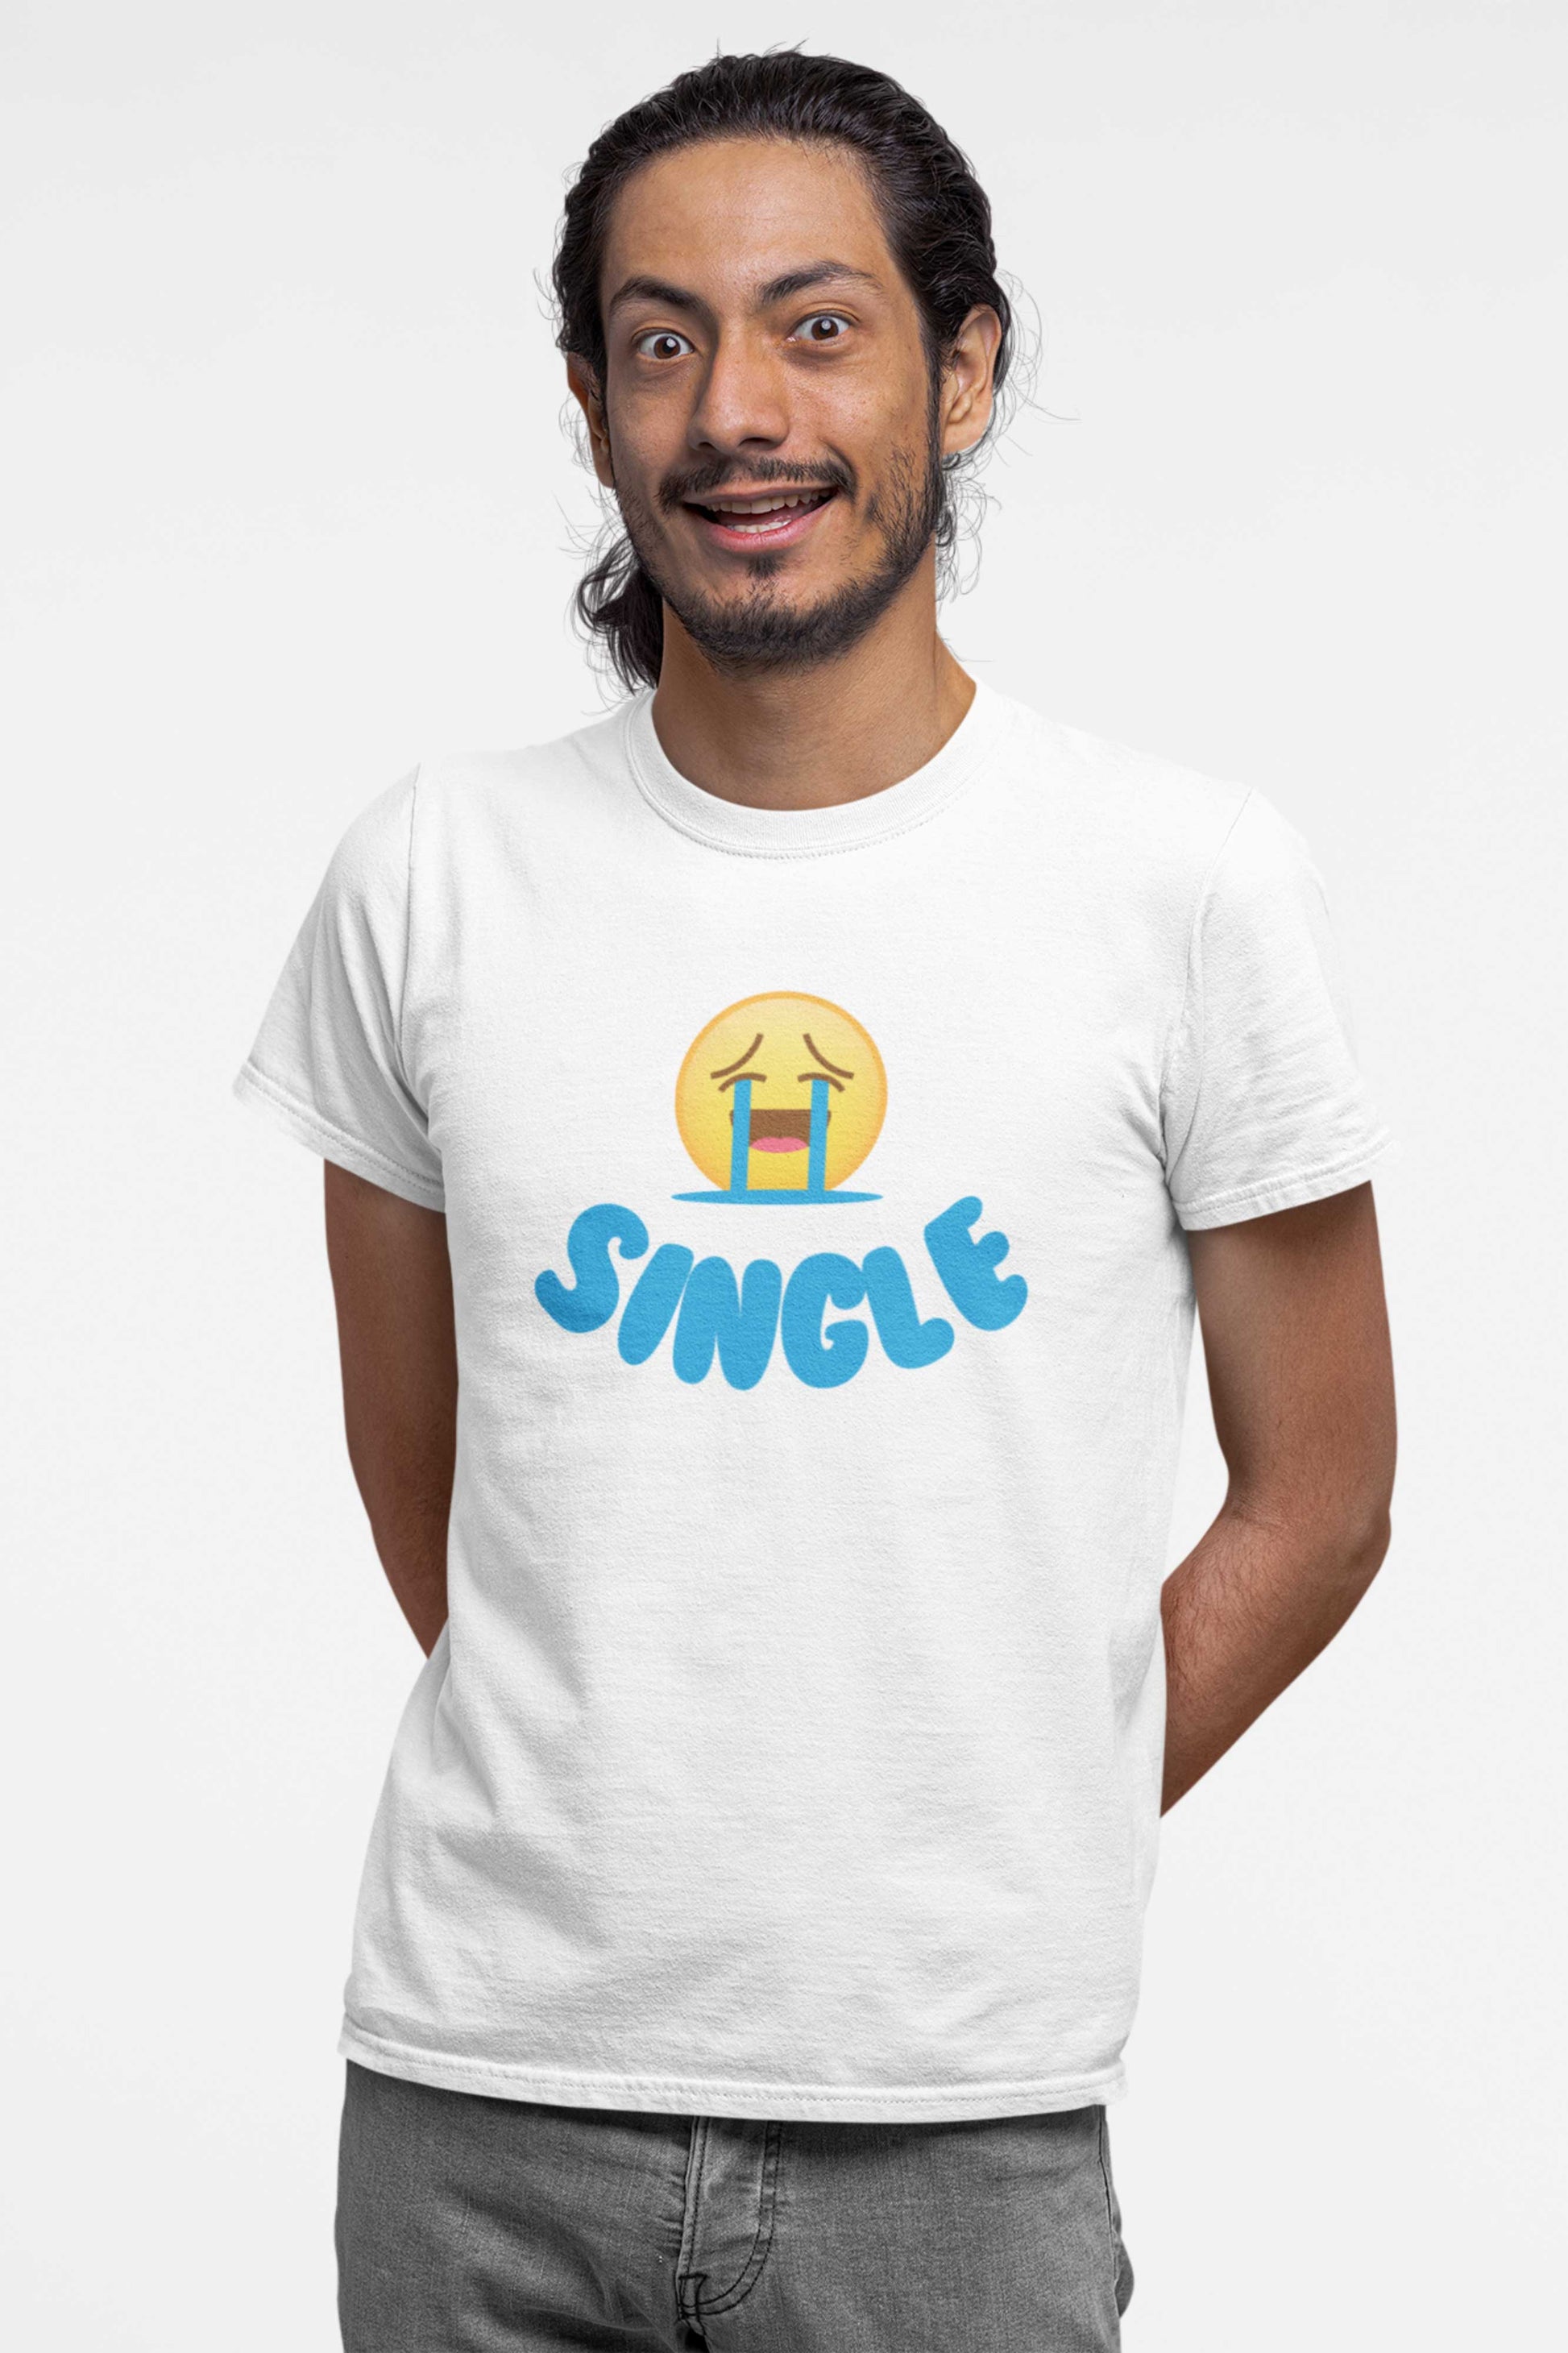 Single Unisex Organic Cotton T-shirt Made In The USA (Copy)-T-Shirts-White-S-Hagsters